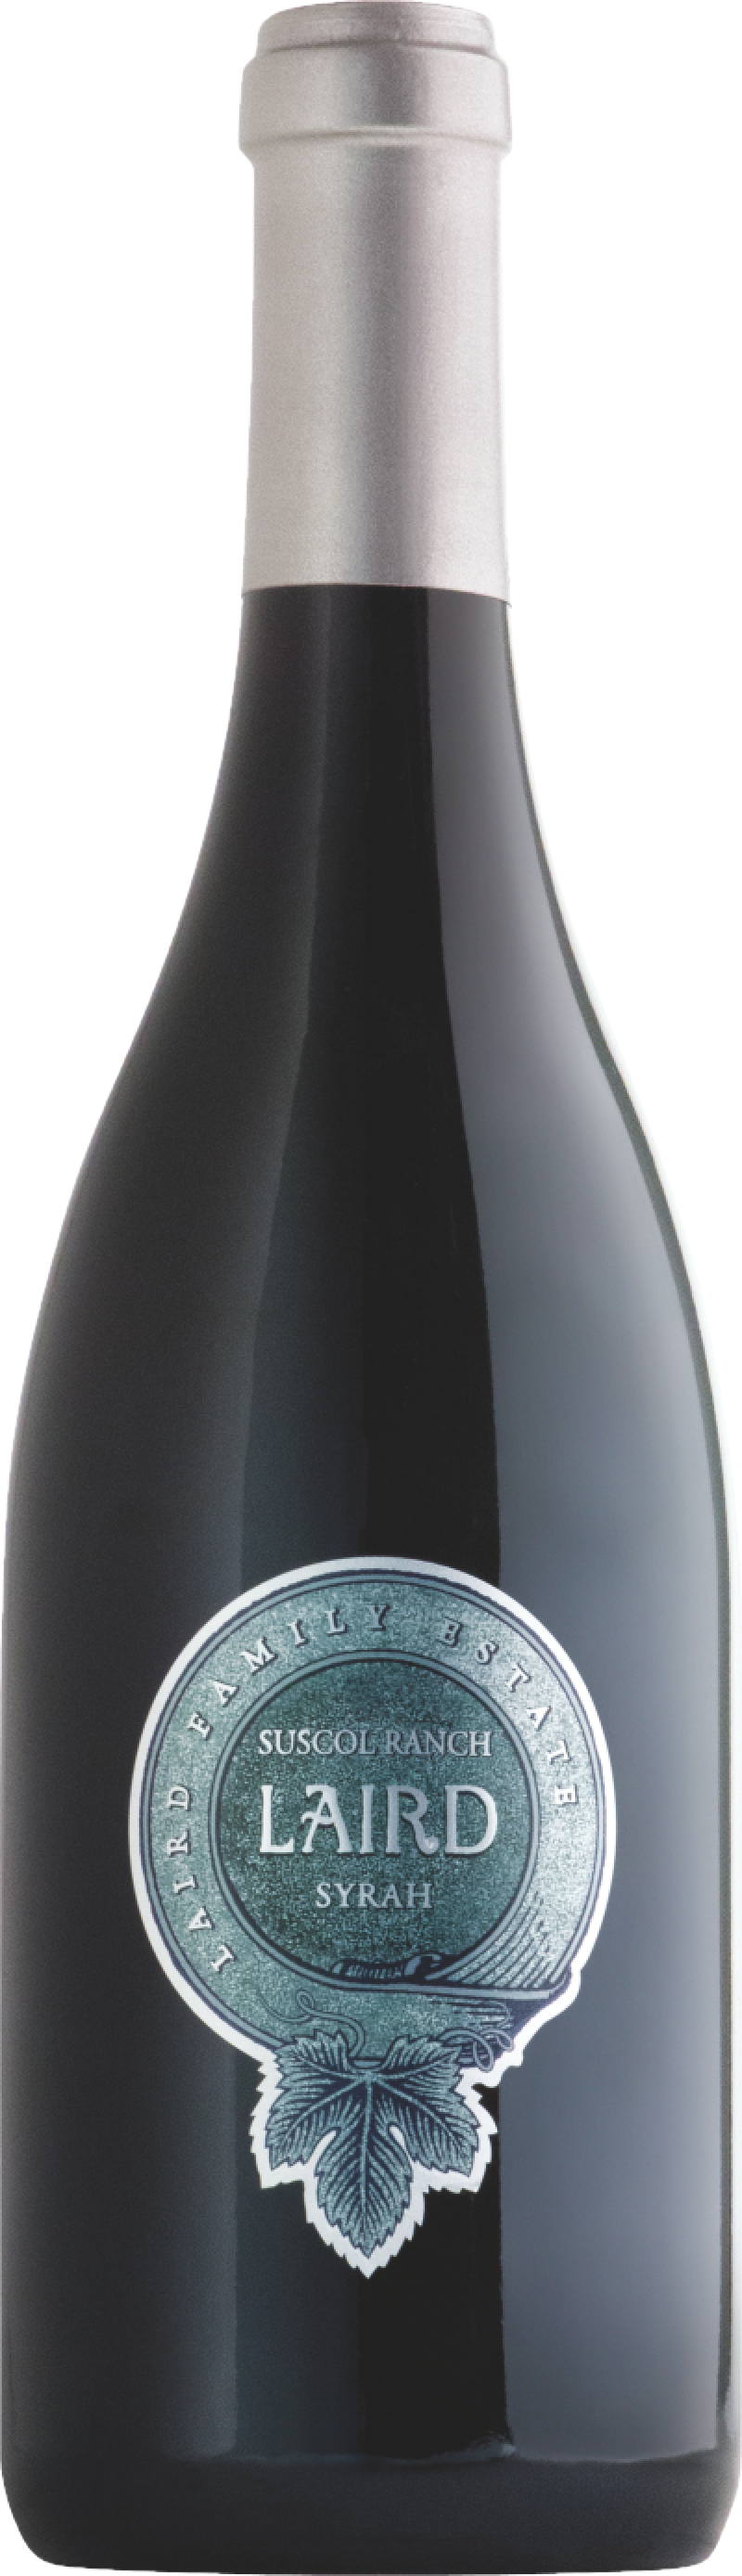 Product Image for 2014 Suscol Ranch Syrah